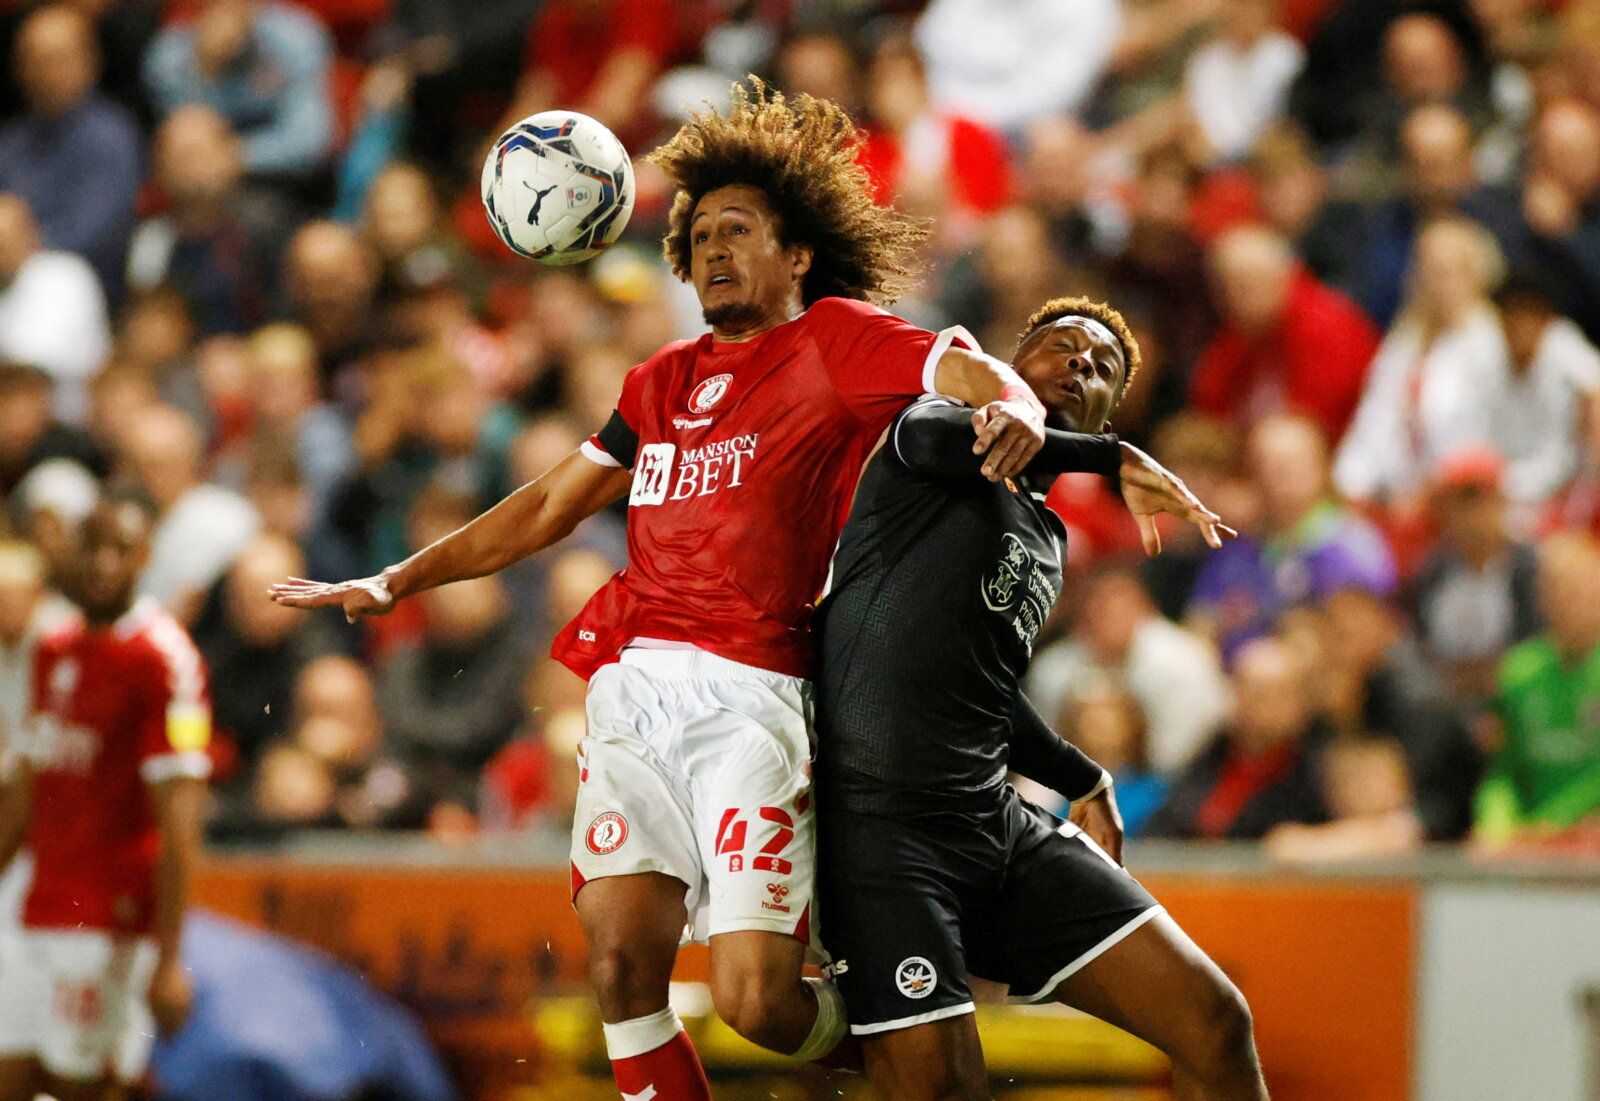 Soccer Football - Championship - Bristol City v Swansea City - Ashton Gate Stadium, Bristol, Britain - August 20, 2021  Bristol City's Han-Noah Massengo in action with Swansea City's Jamal Lowe  Action Images/John Sibley  EDITORIAL USE ONLY. No use with unauthorized audio, video, data, fixture lists, club/league logos or 